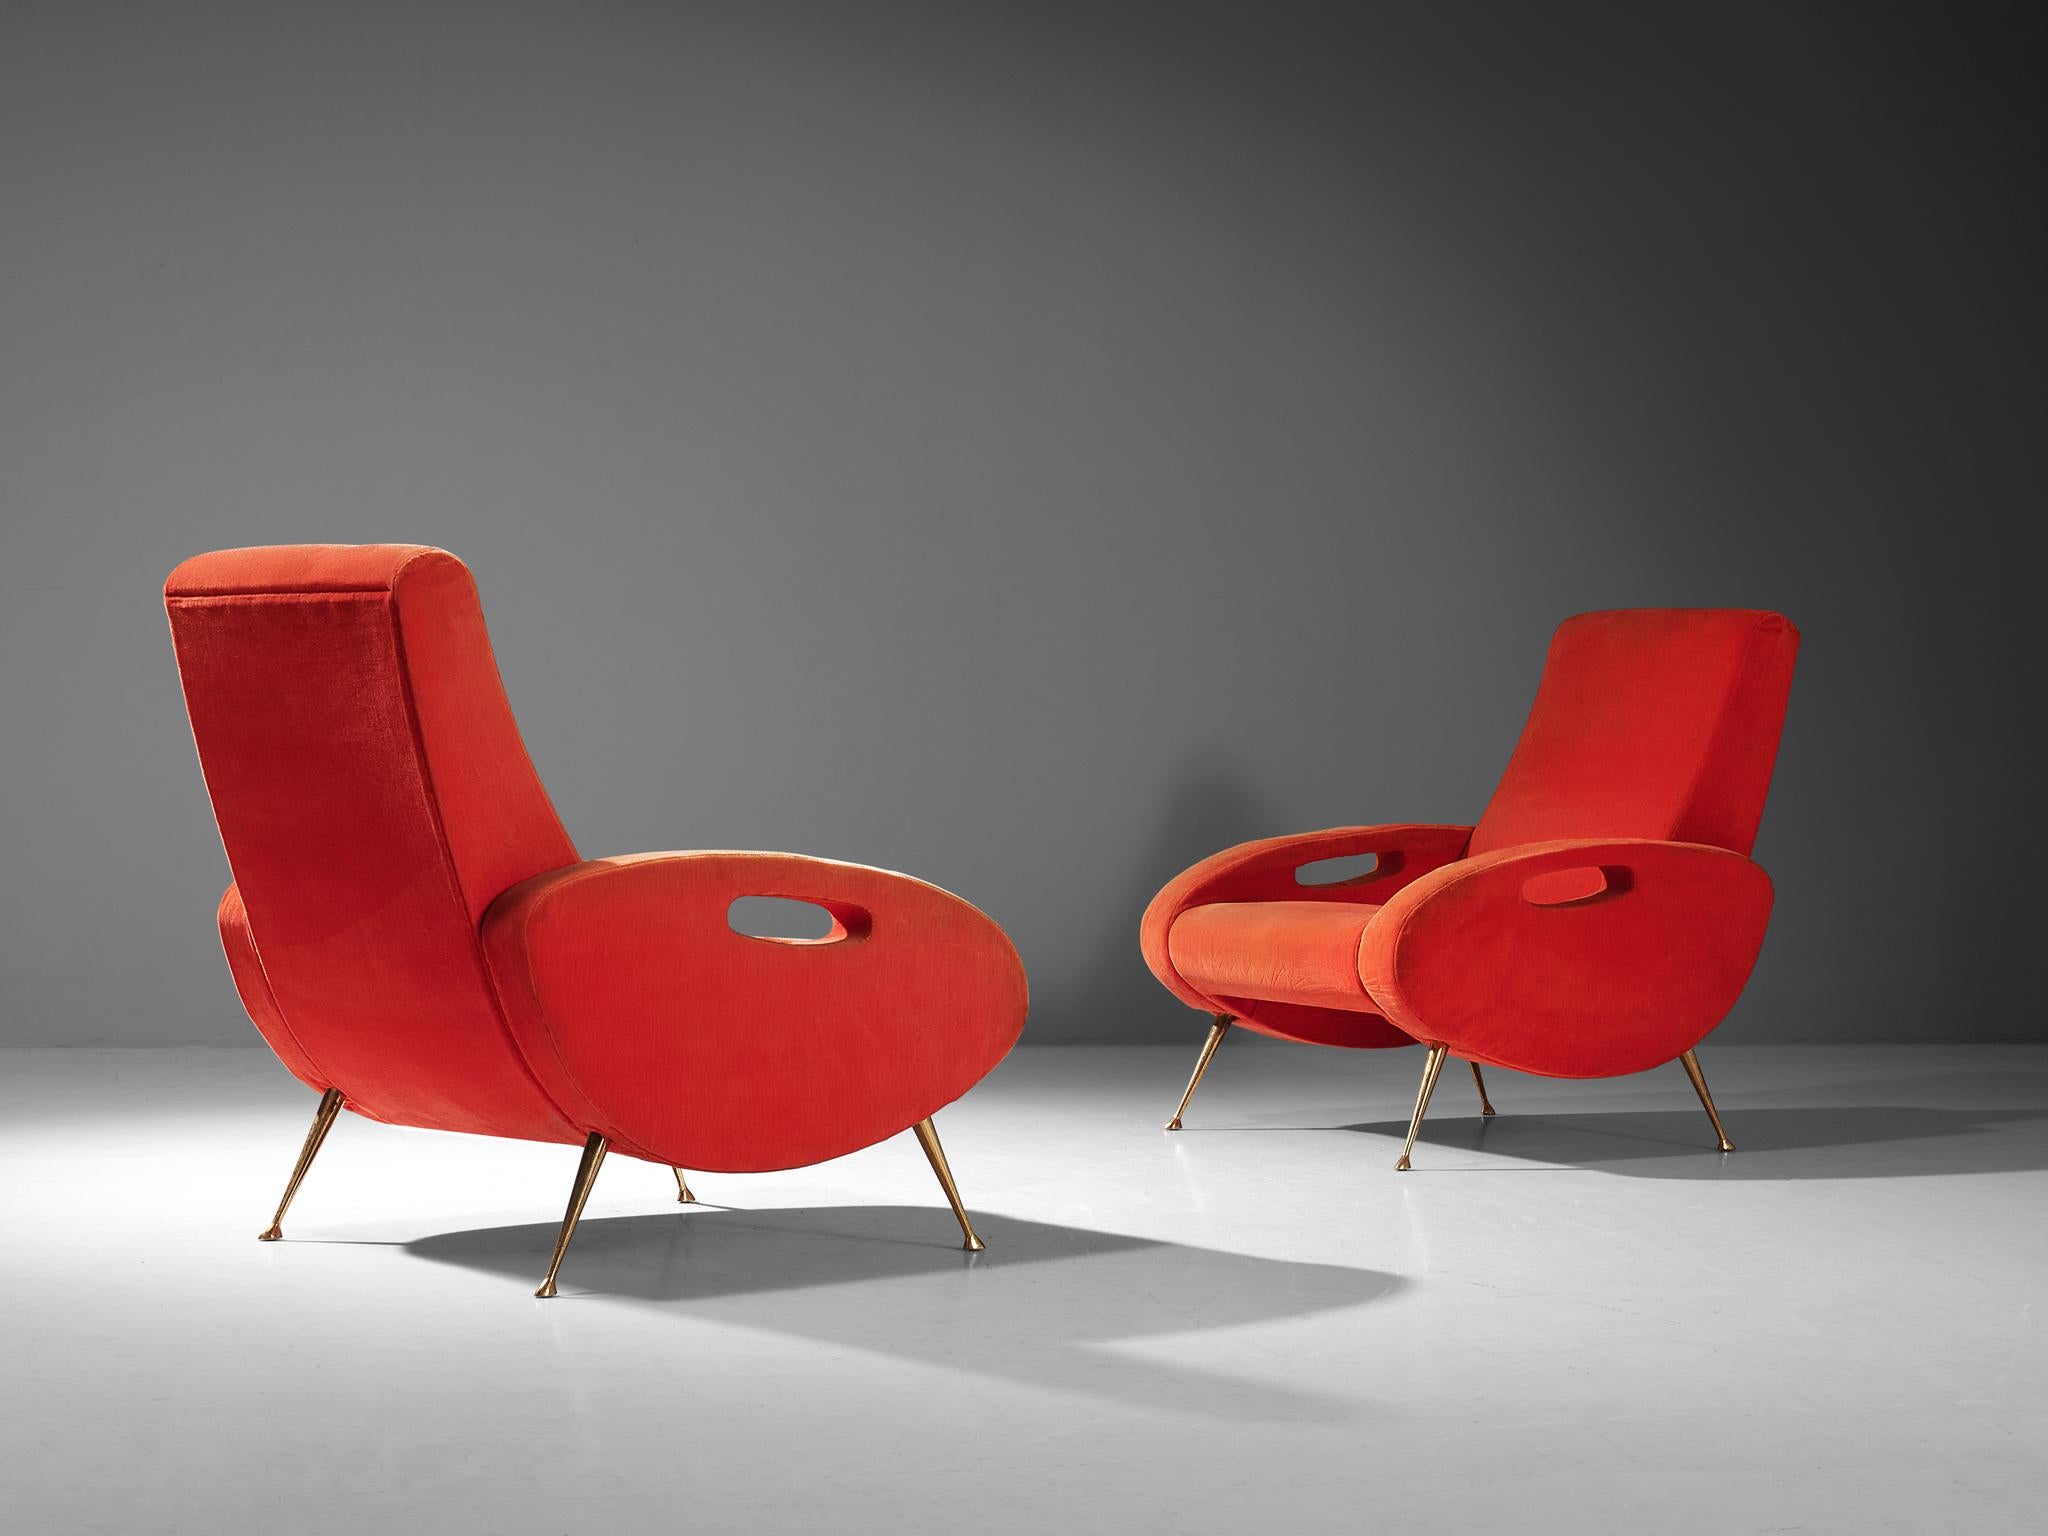 François Letourneur for Maurice Mourra Freres, pair of lounge chairs, velvet upholstery, brass, France, 1950s

This pair of lounge chairs displays a variety of well-designed bold lines which provide each chair with an elegant look that reminds of